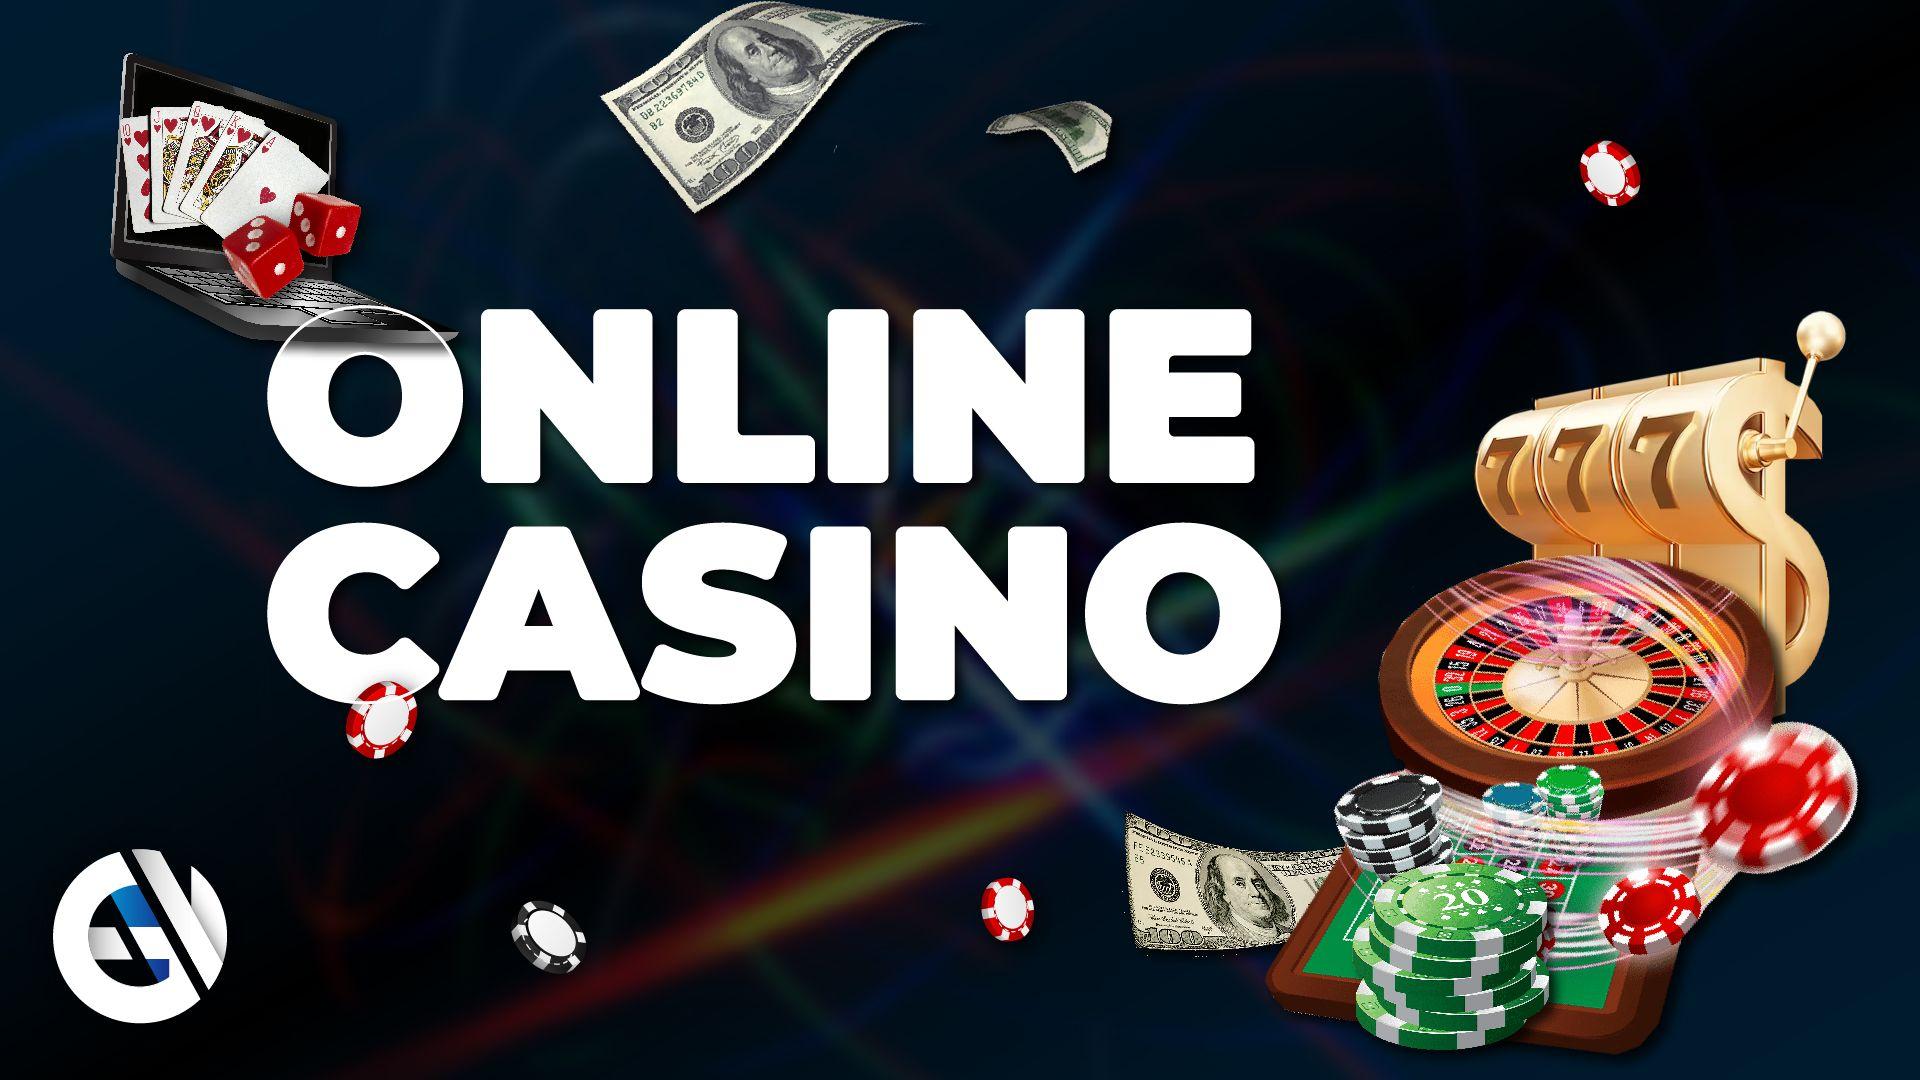 Where can technology be used to enhance your online casino experience?